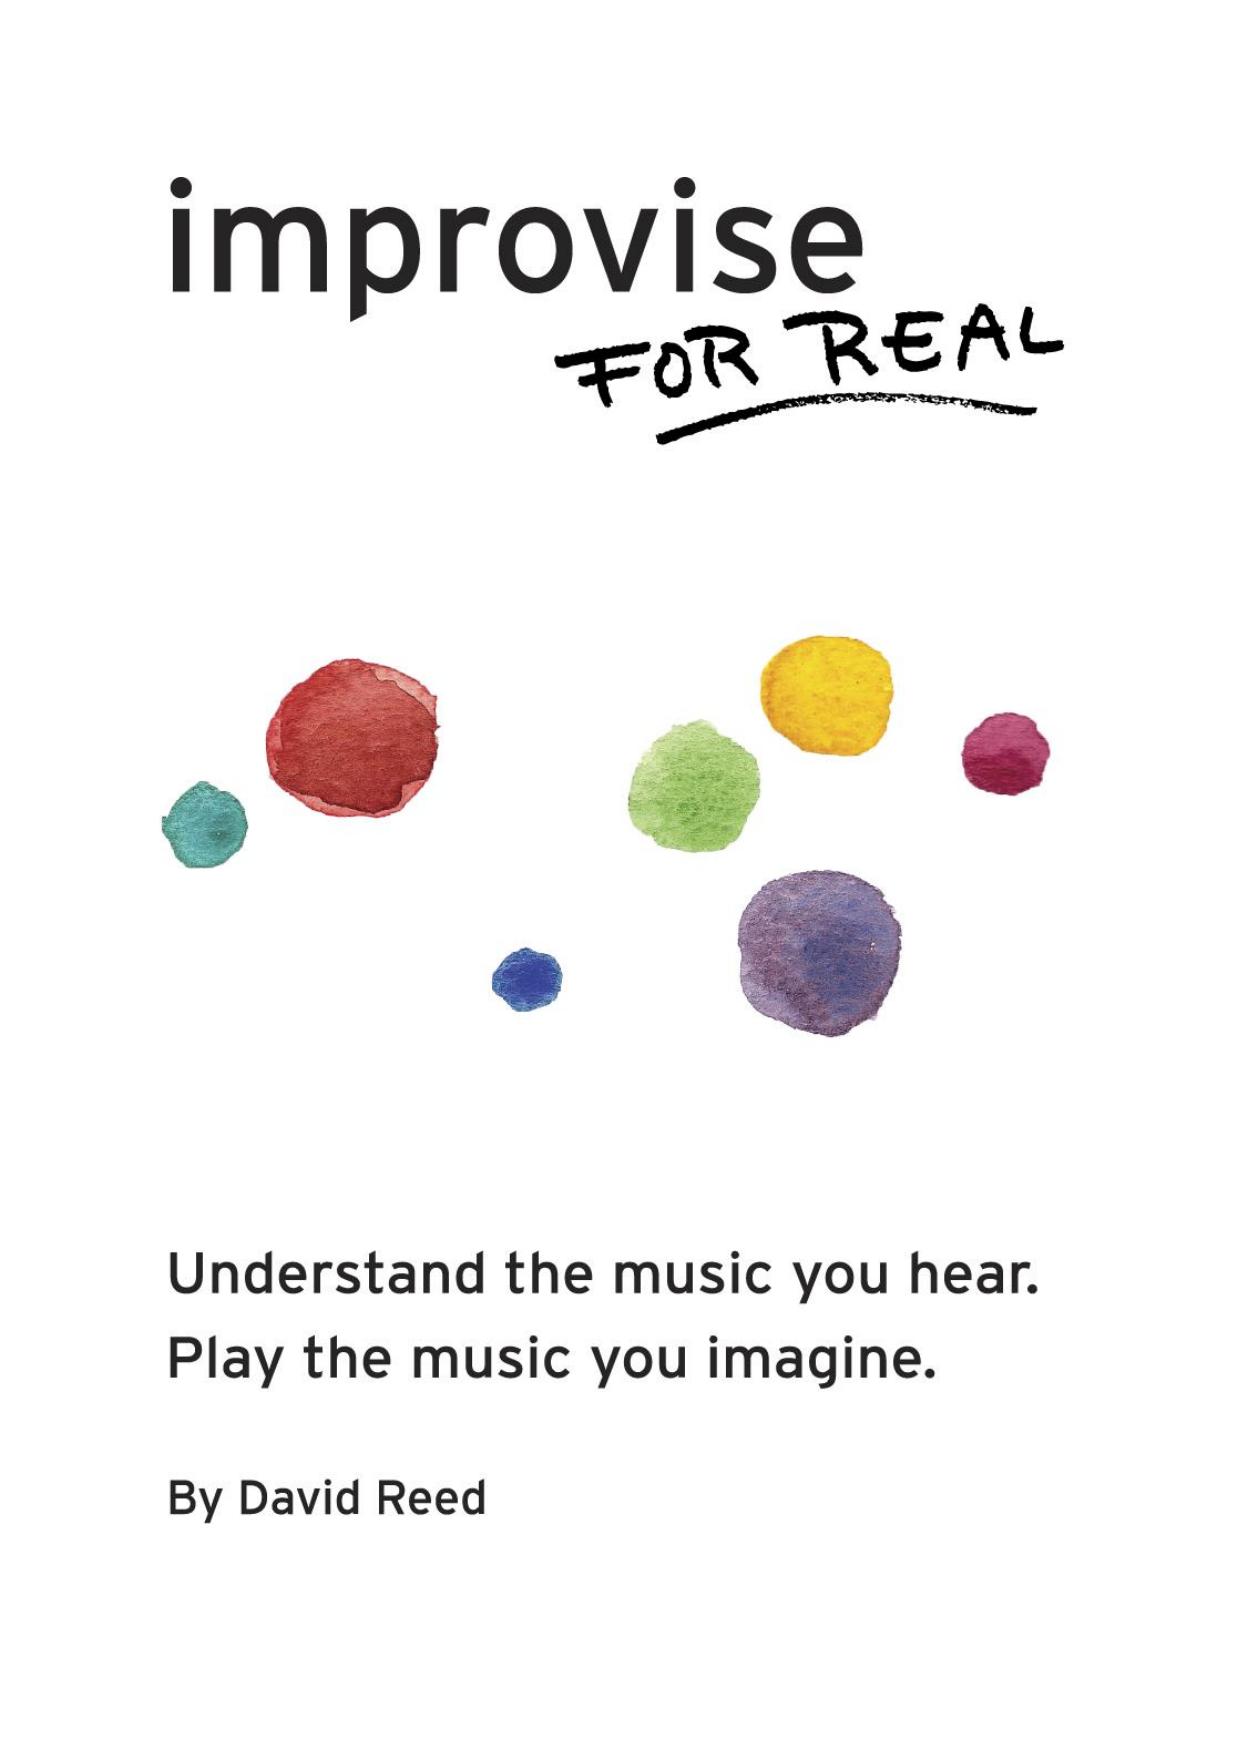 Improvise For Real by David Reed